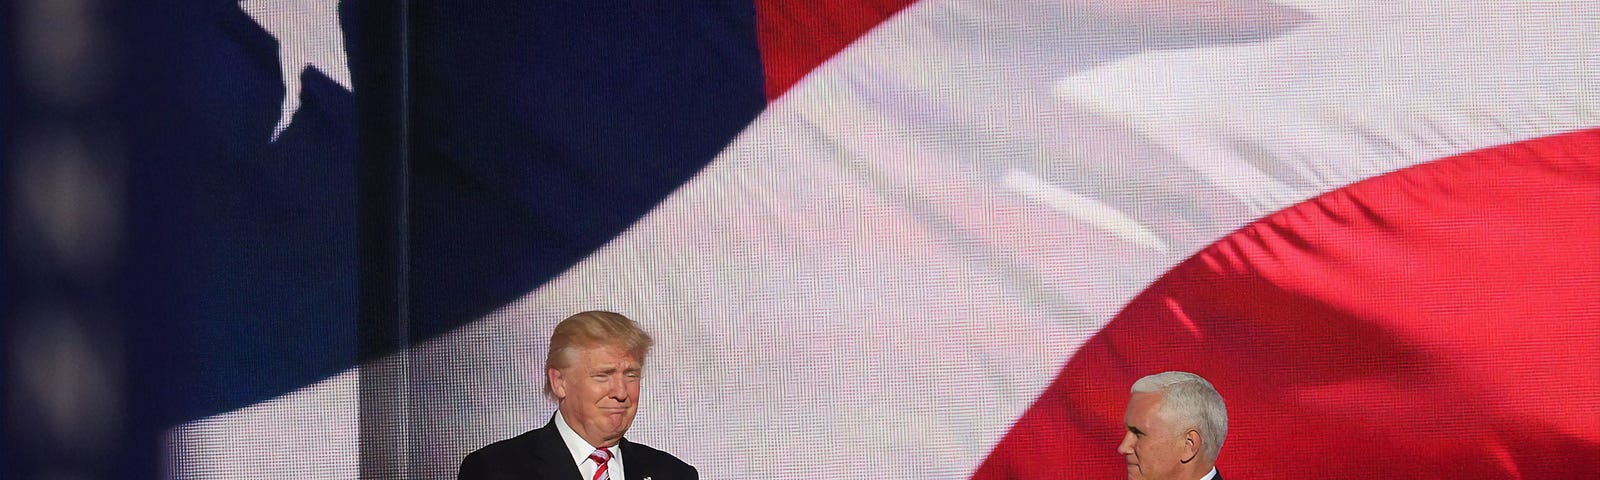 Background huge American flag, President Trump on left giving thumbs-up to Vice President Pence, on the right, who is smiling and applauding.